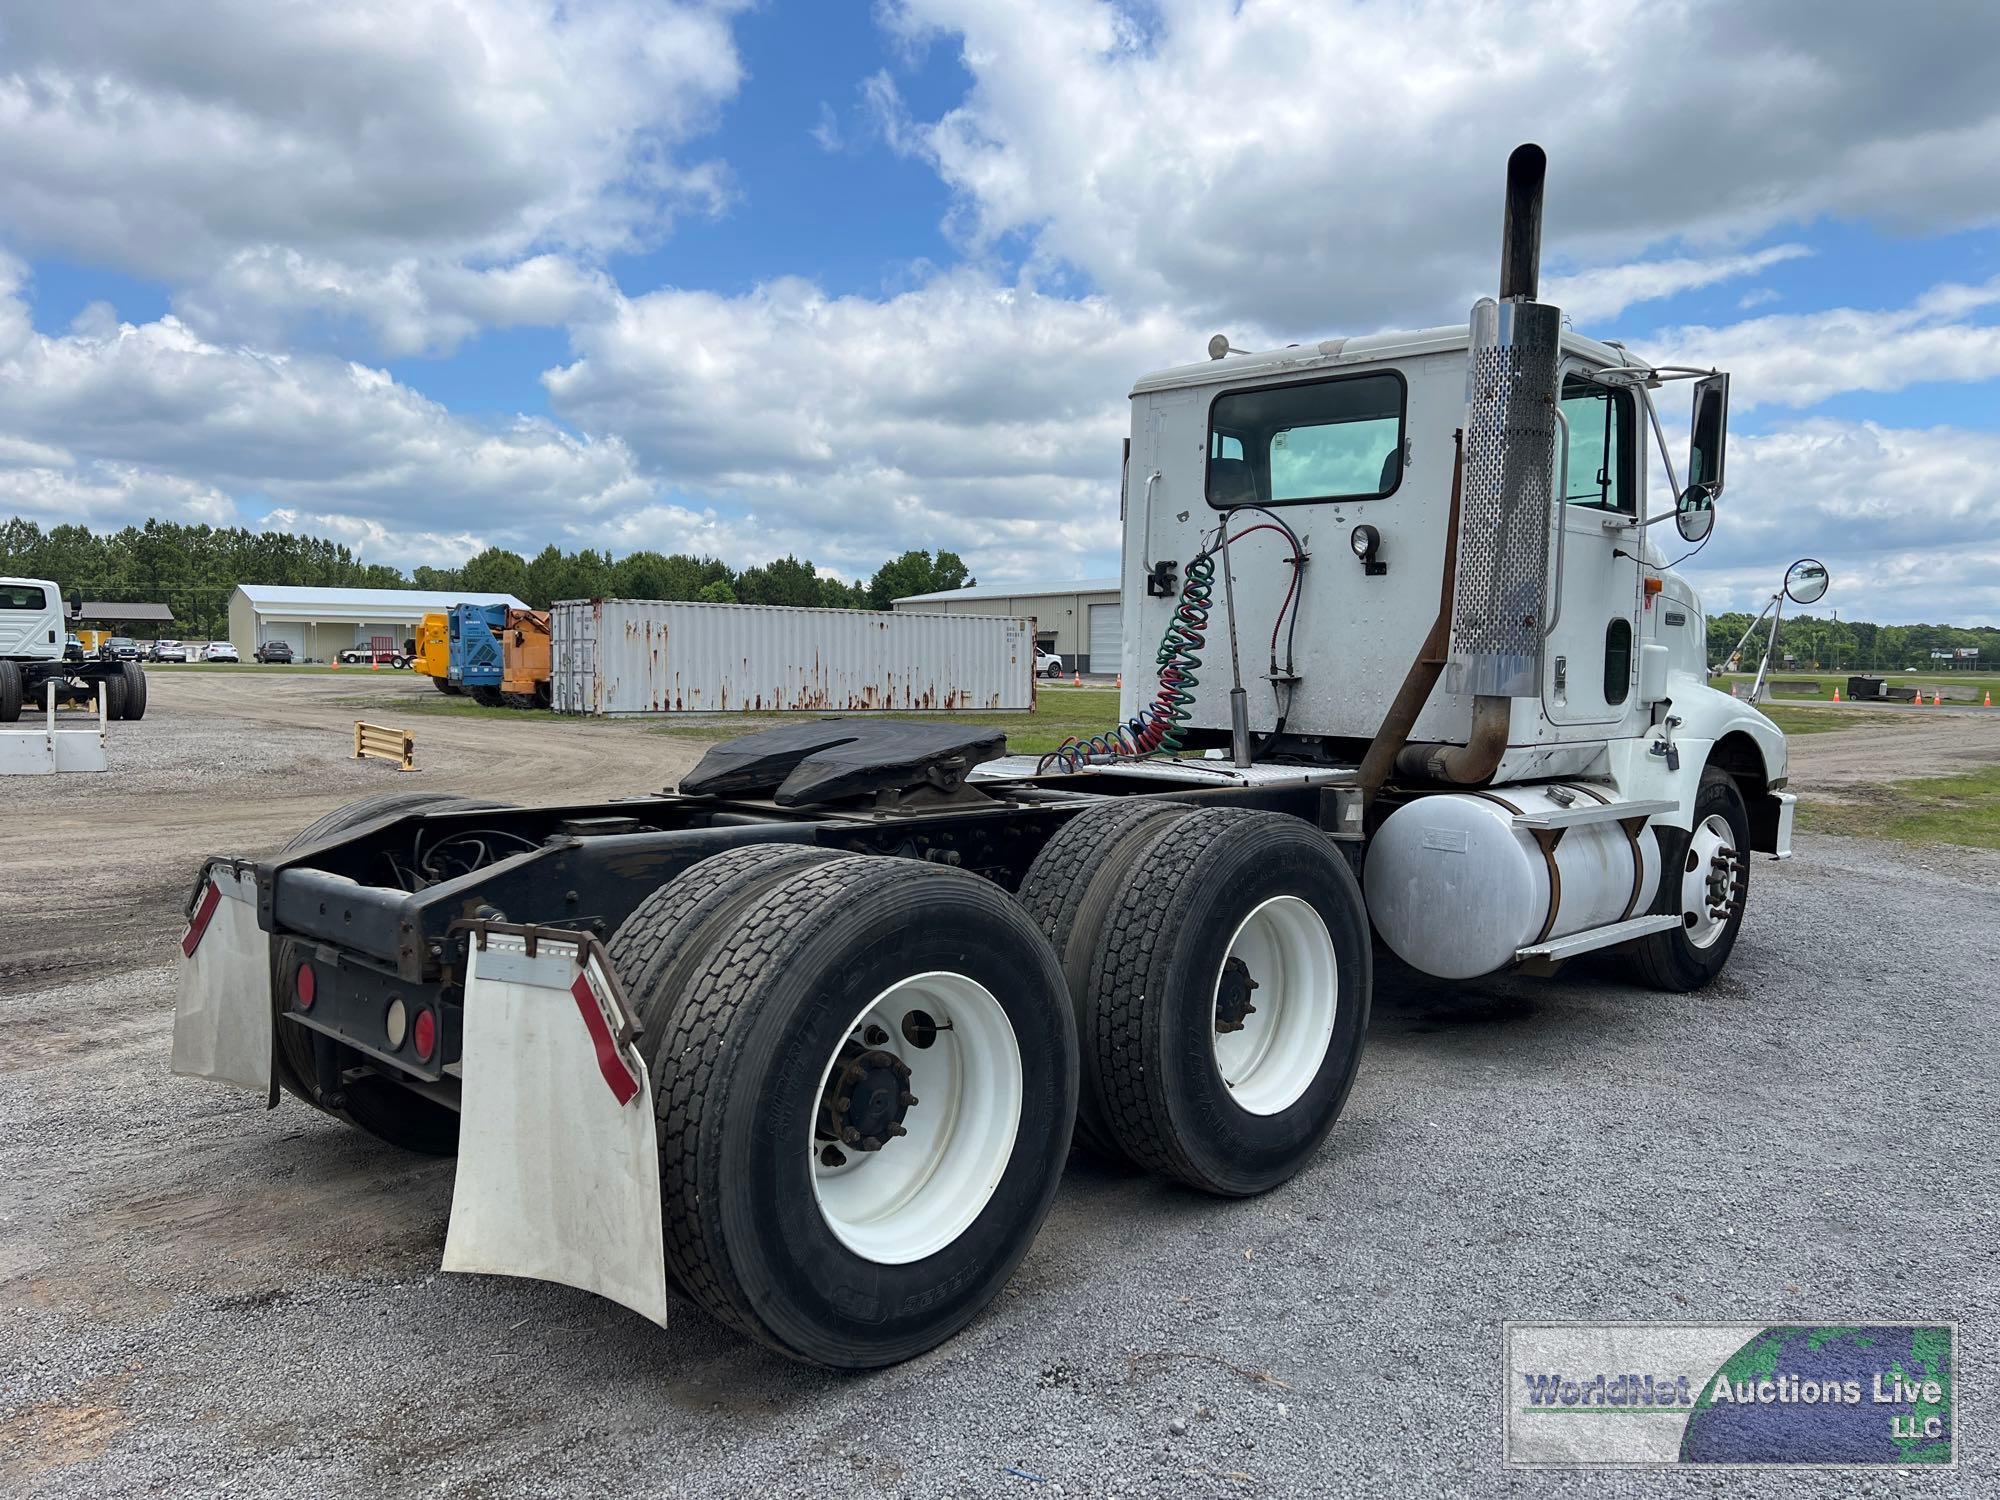 1997 INTERNATIONAL 9200 DAY CAB ROAD TRACTOR, VIN # 2HSFMAMR9VC031557